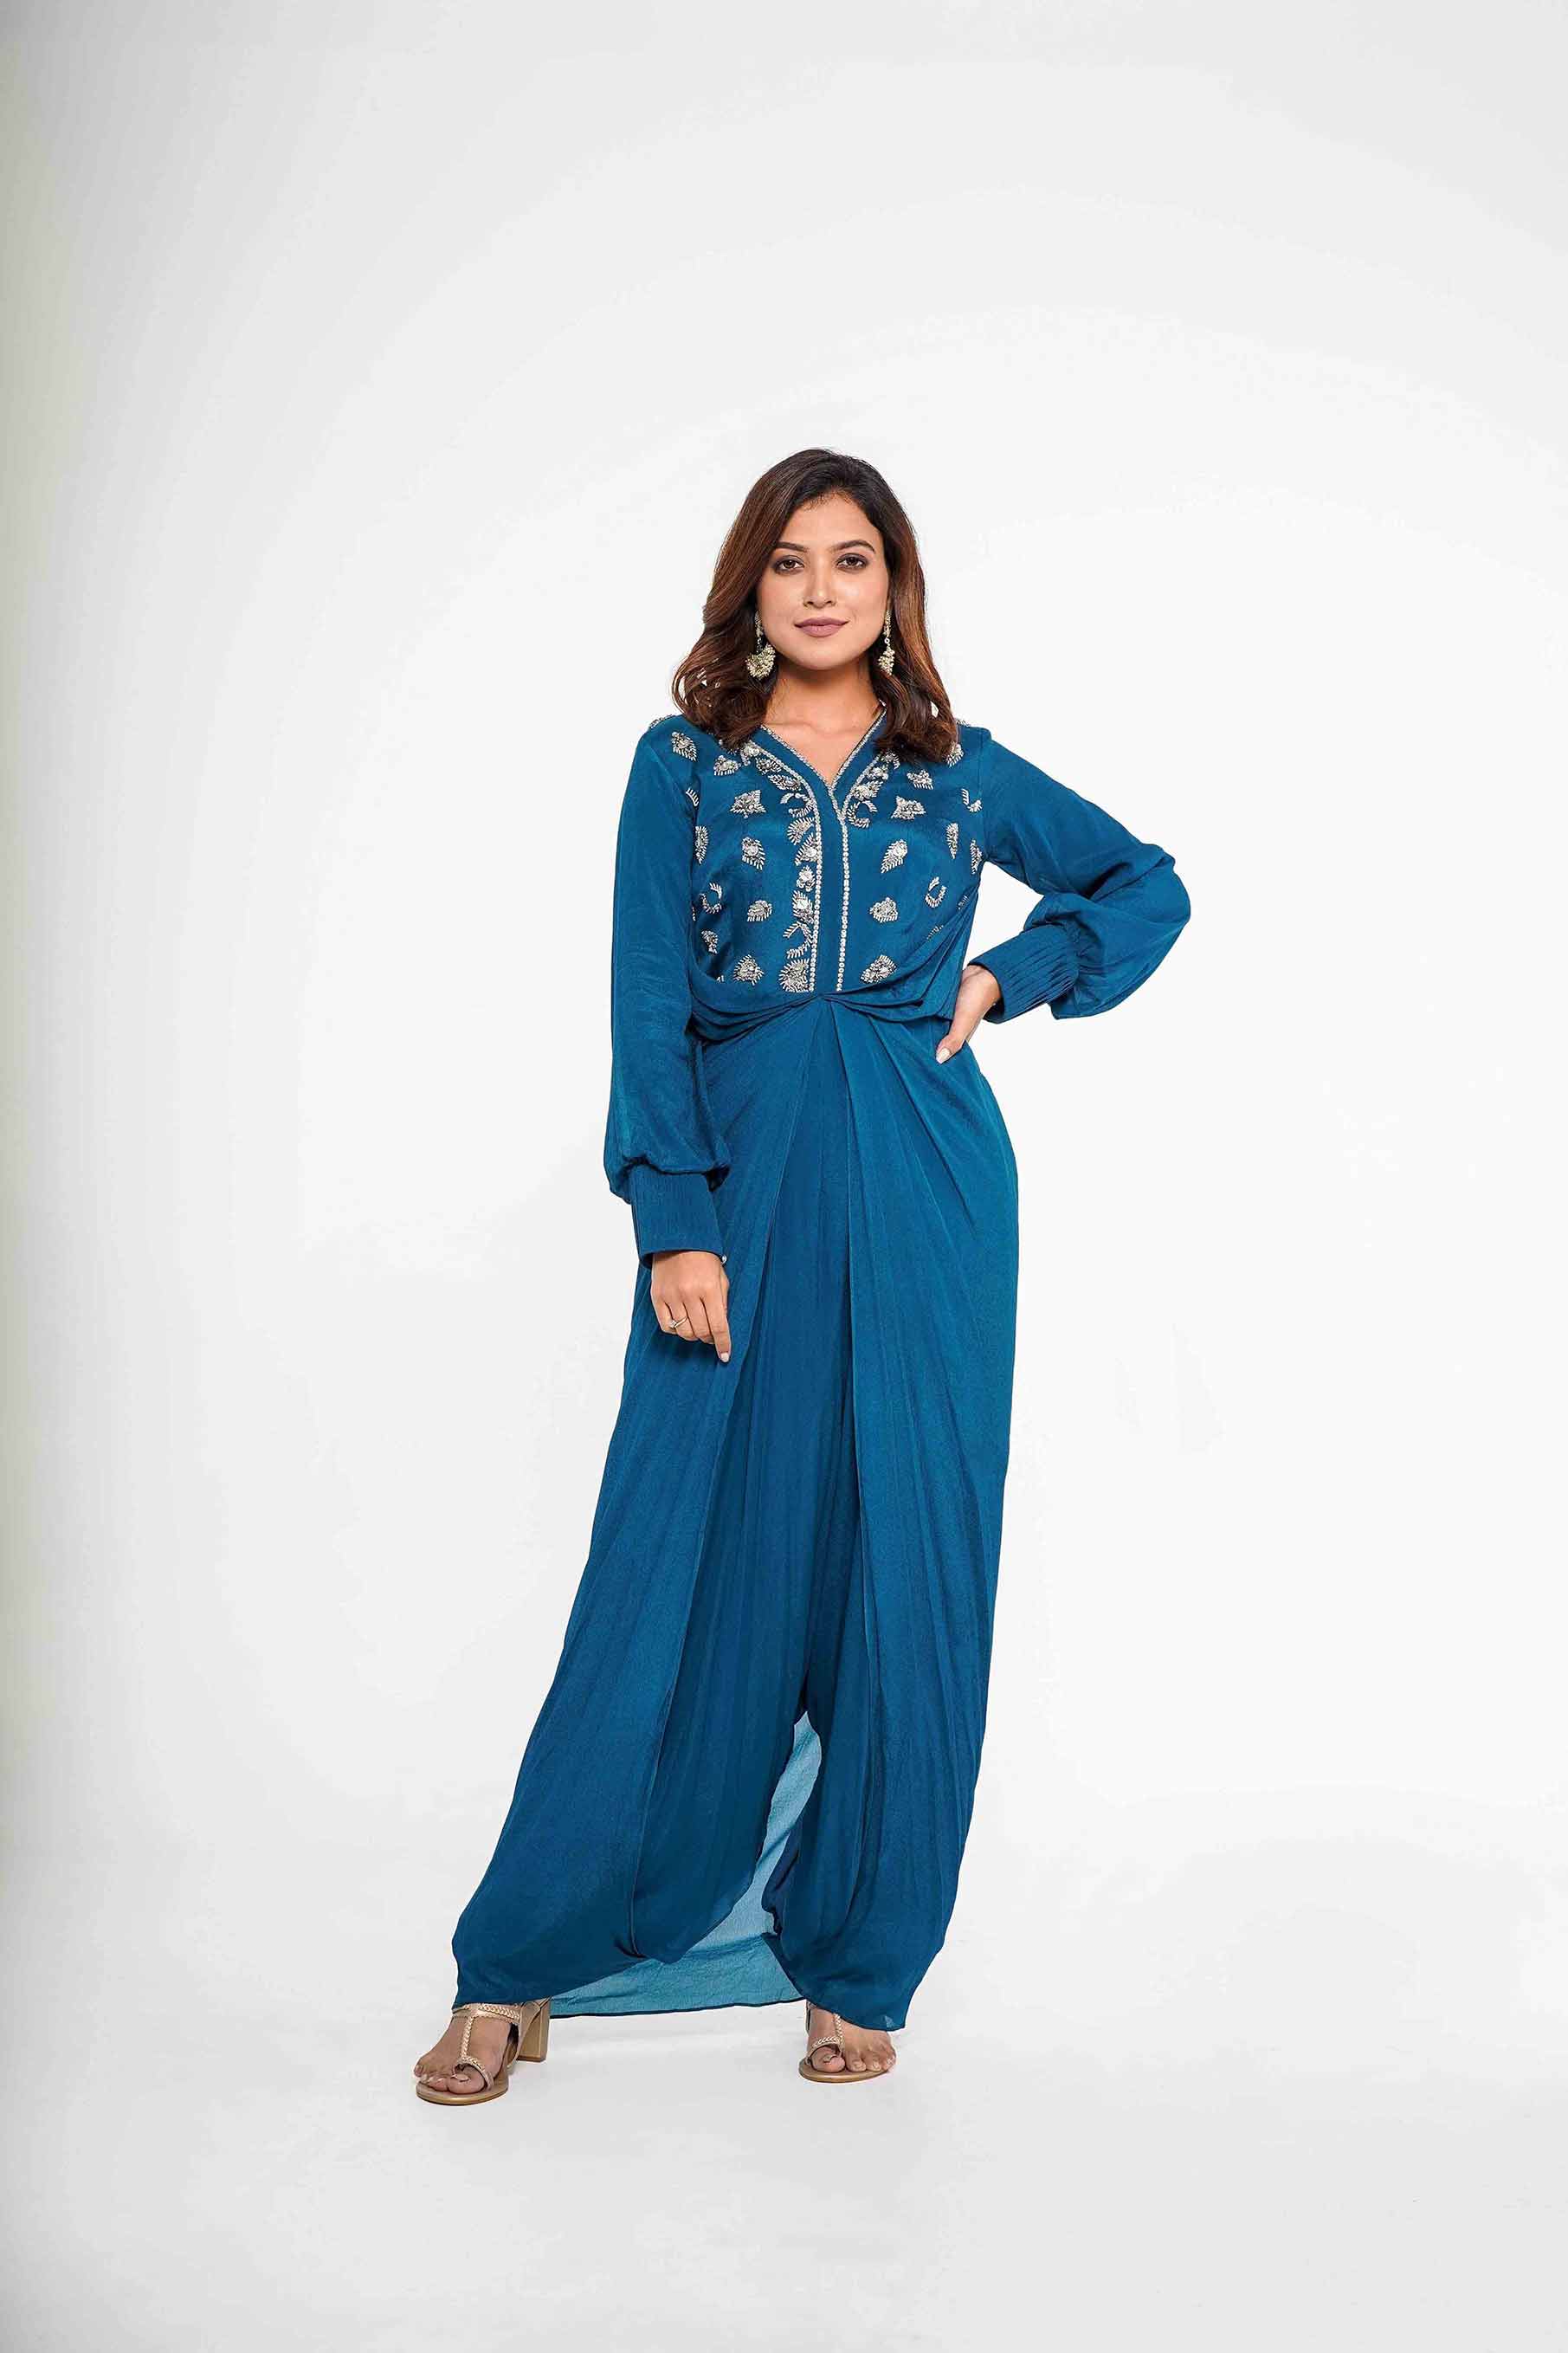 Teal Crepe Jumpsuit with an attached overlap panel.